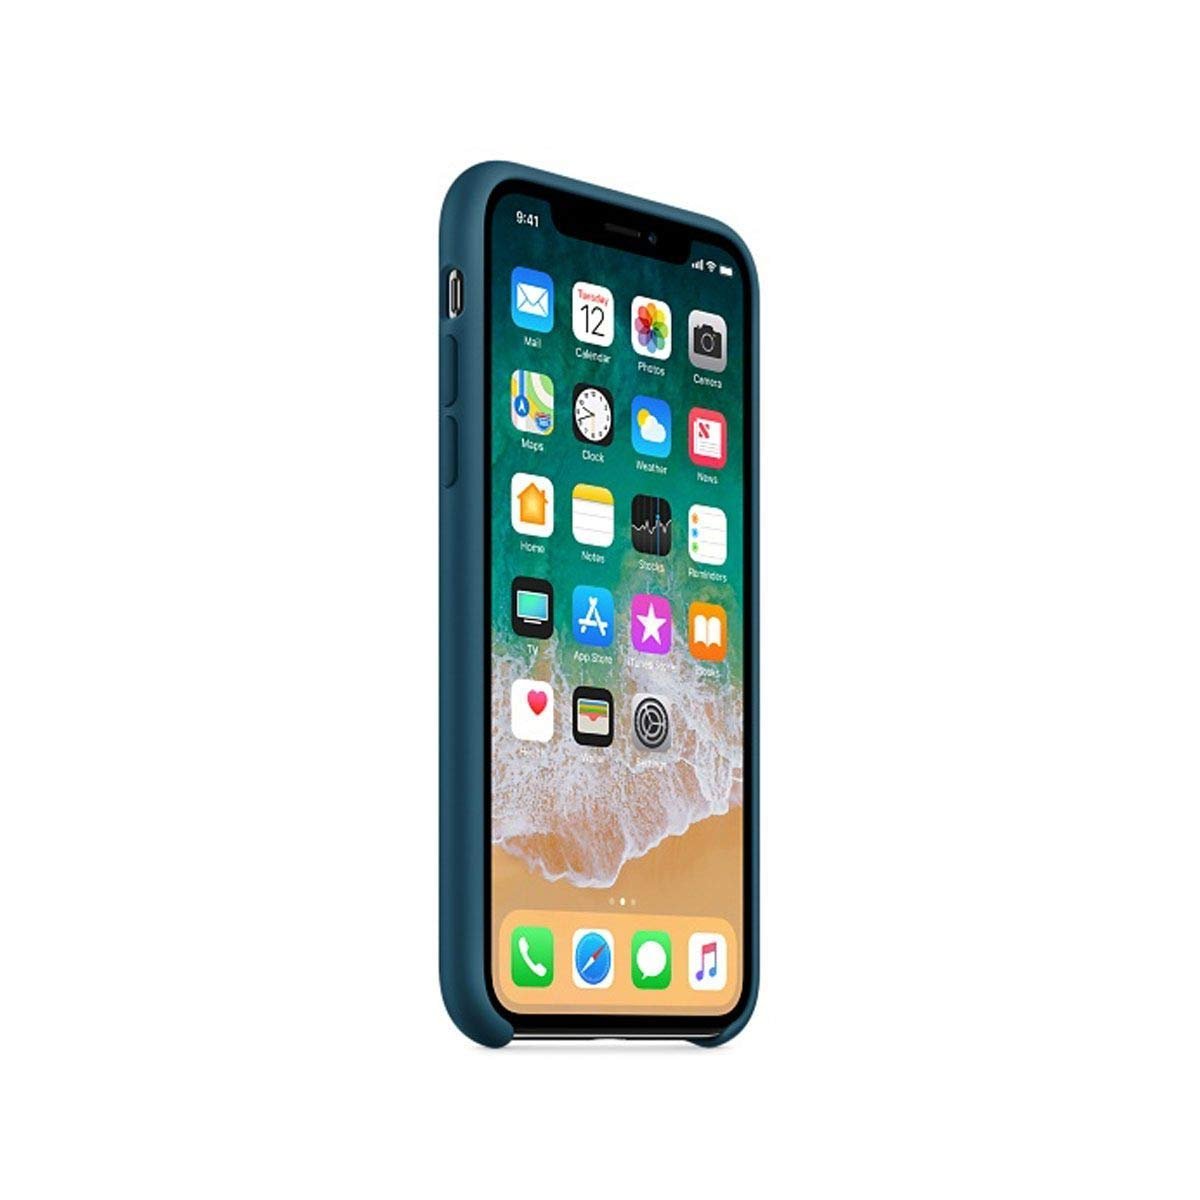 Apple Silicone Case (for iPhone X) - Cosmos Blue